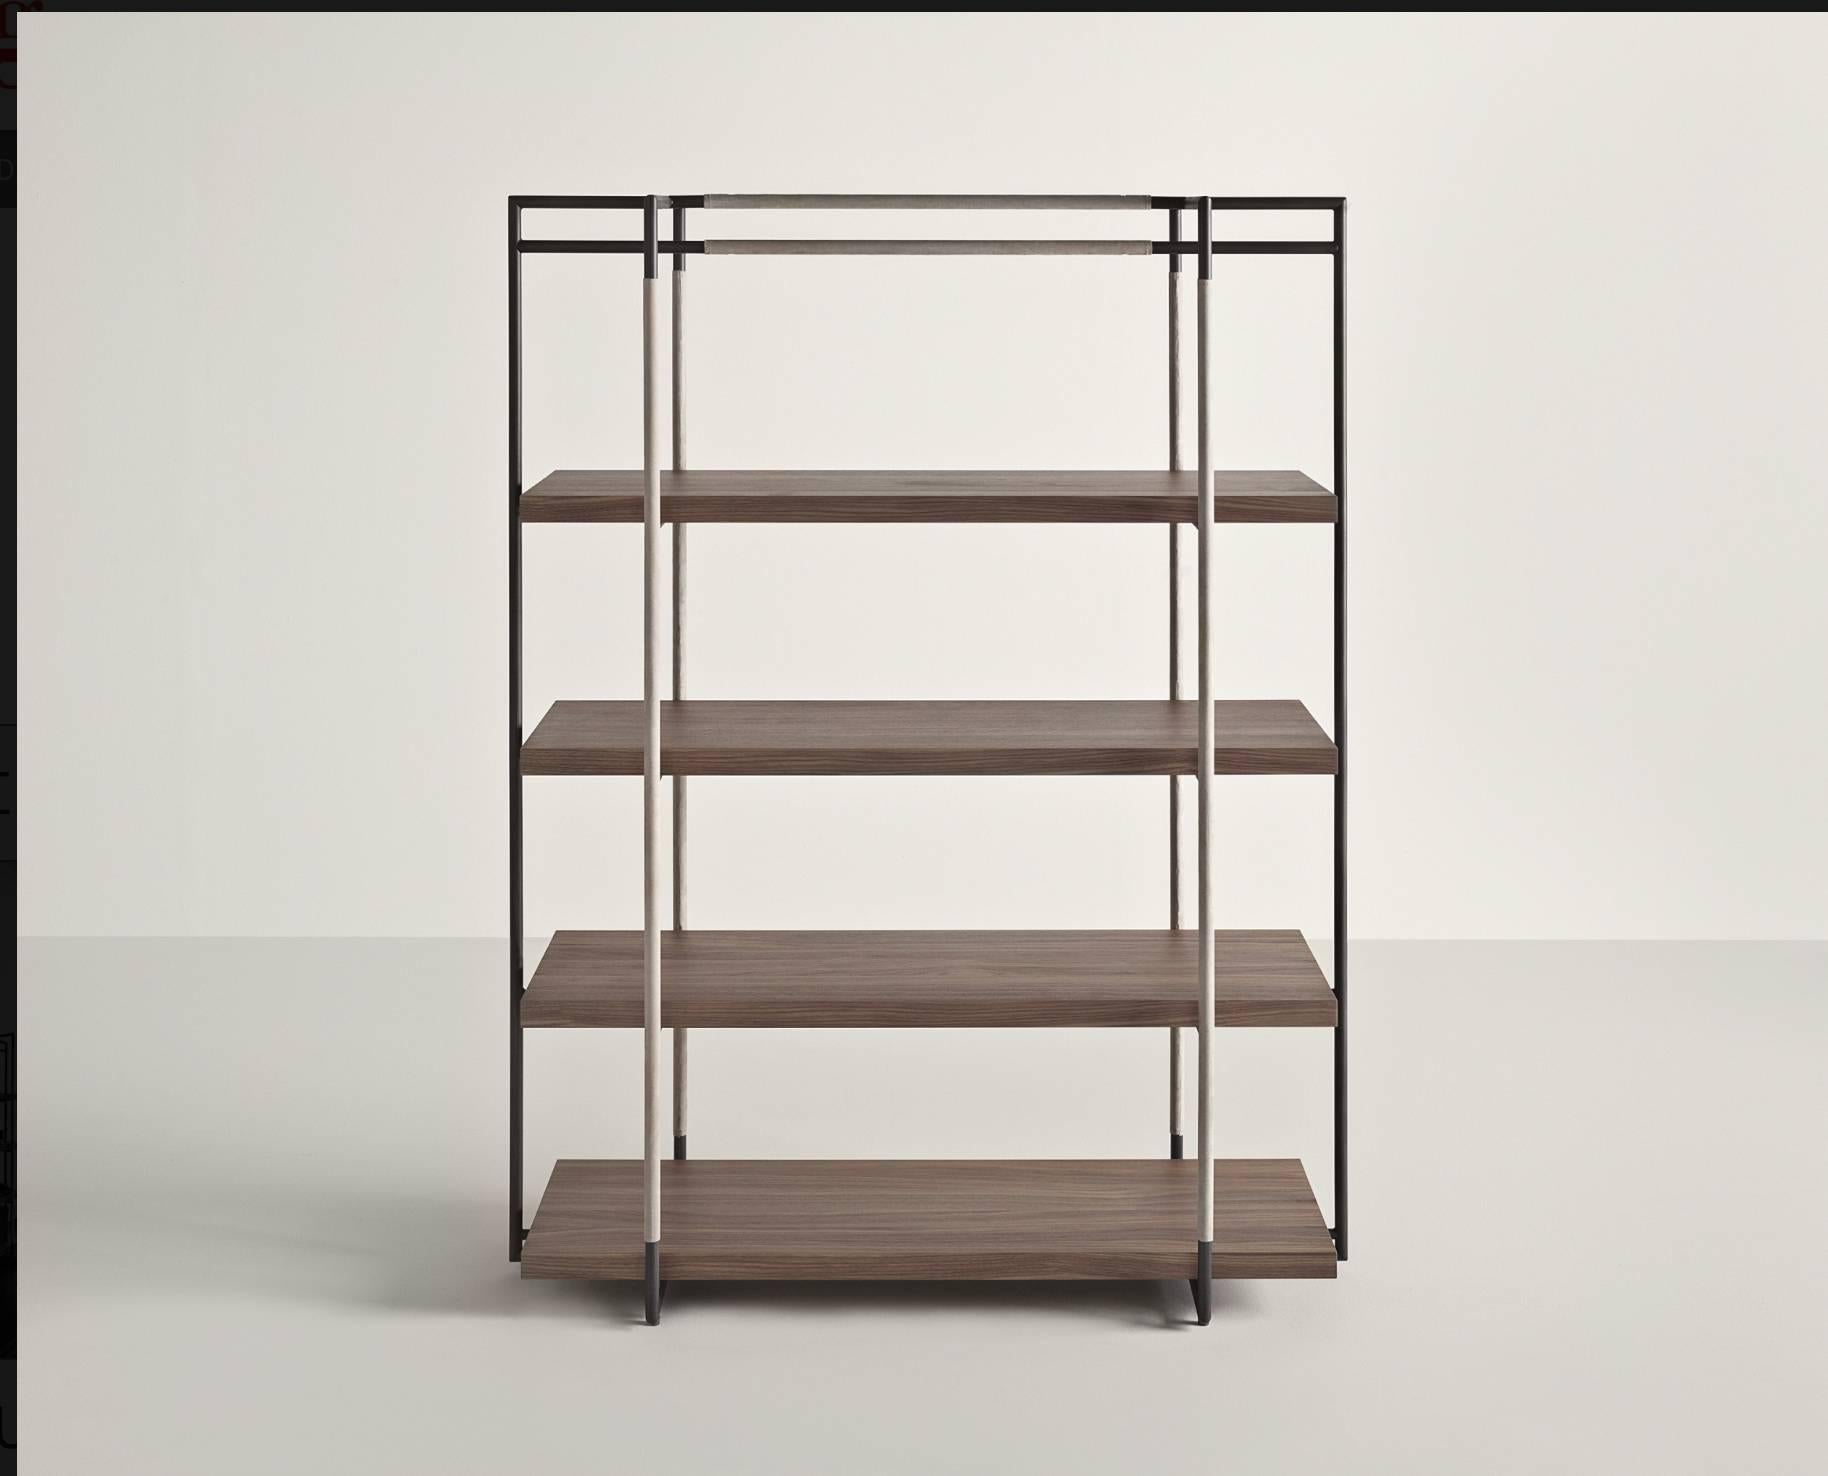 Bak bookcase in walnut, steel and leather in various colors
by Ferruccio Laviani.

Bookcase with a lacquered steel frame upholstered with leather and walnut shelves.

Dimensions: H 165, W 128, D 48.